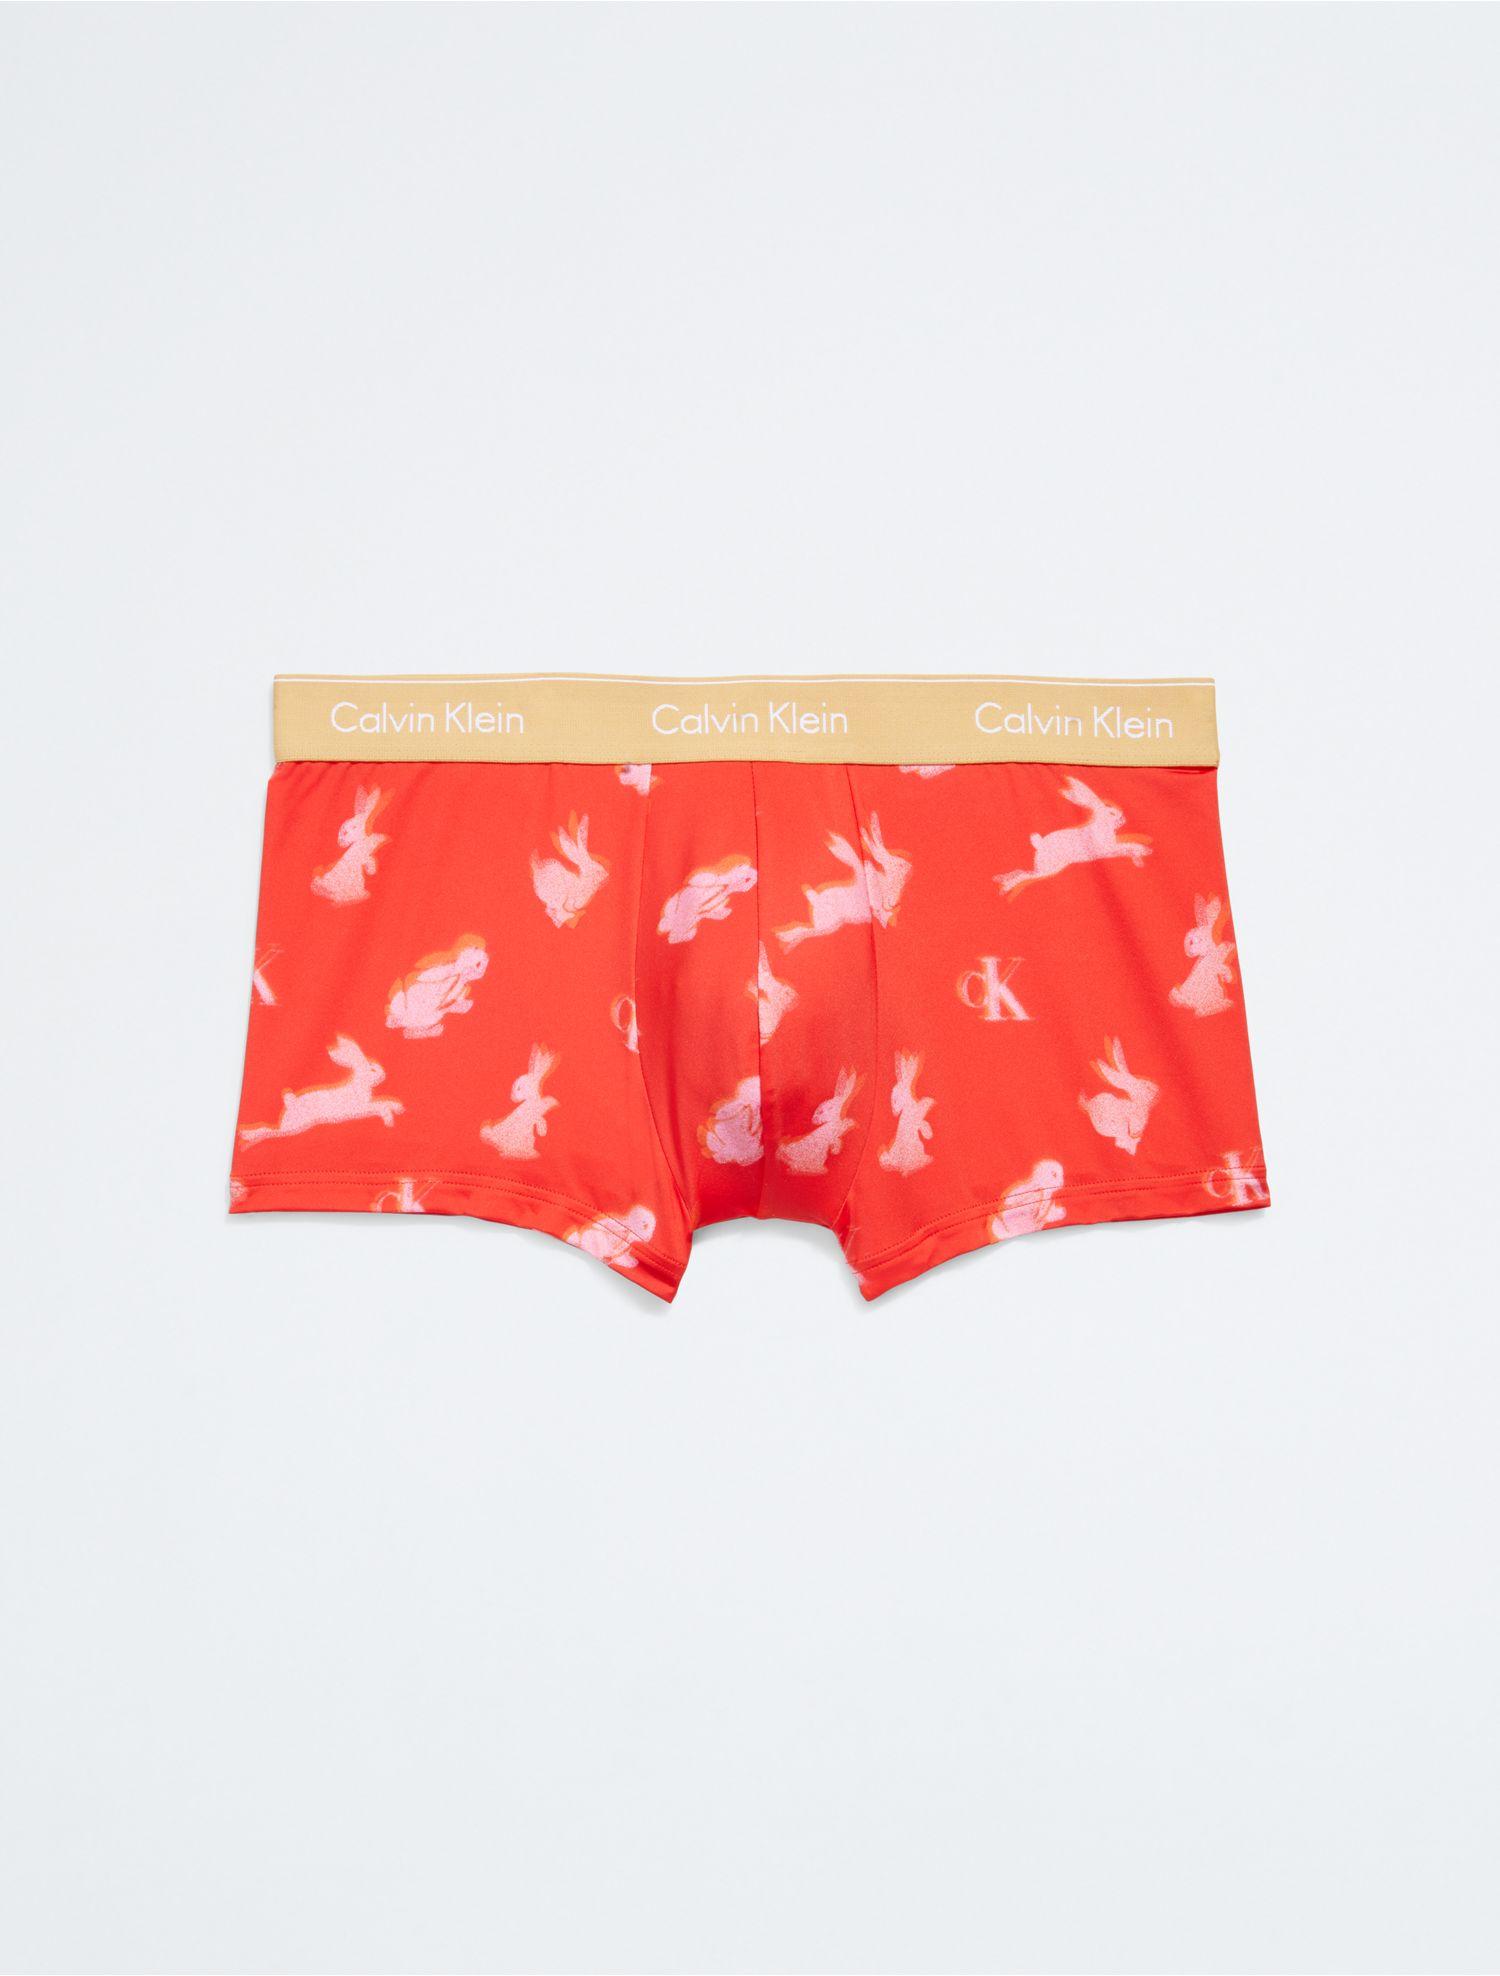 Calvin Klein Lunar New Year Low Rise Trunk in Red for Men